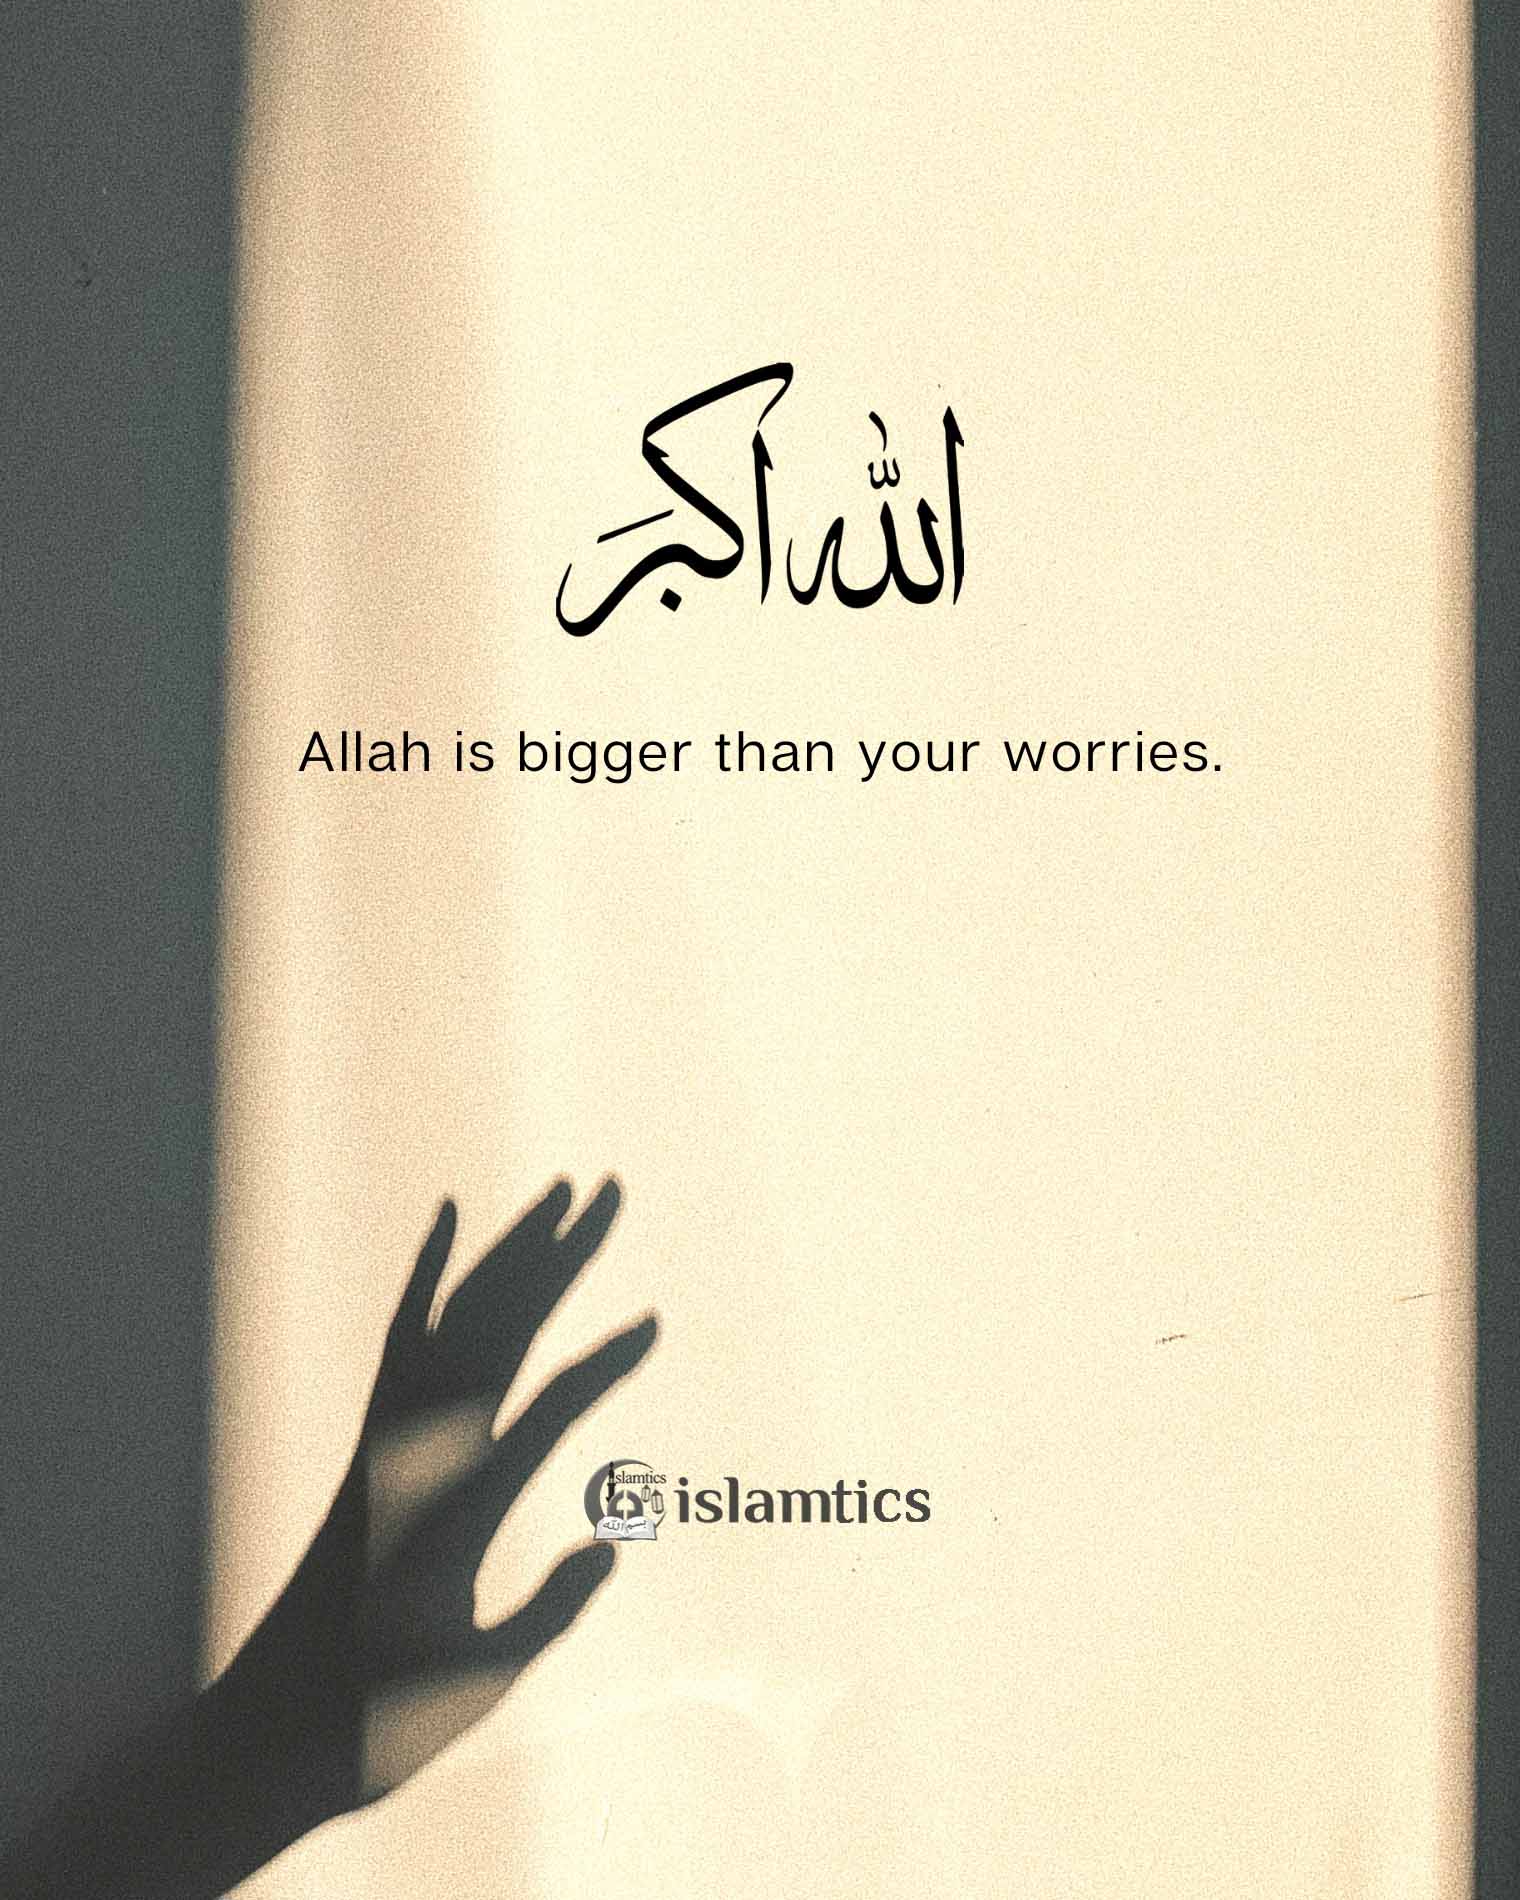  Allah is bigger than your worries.